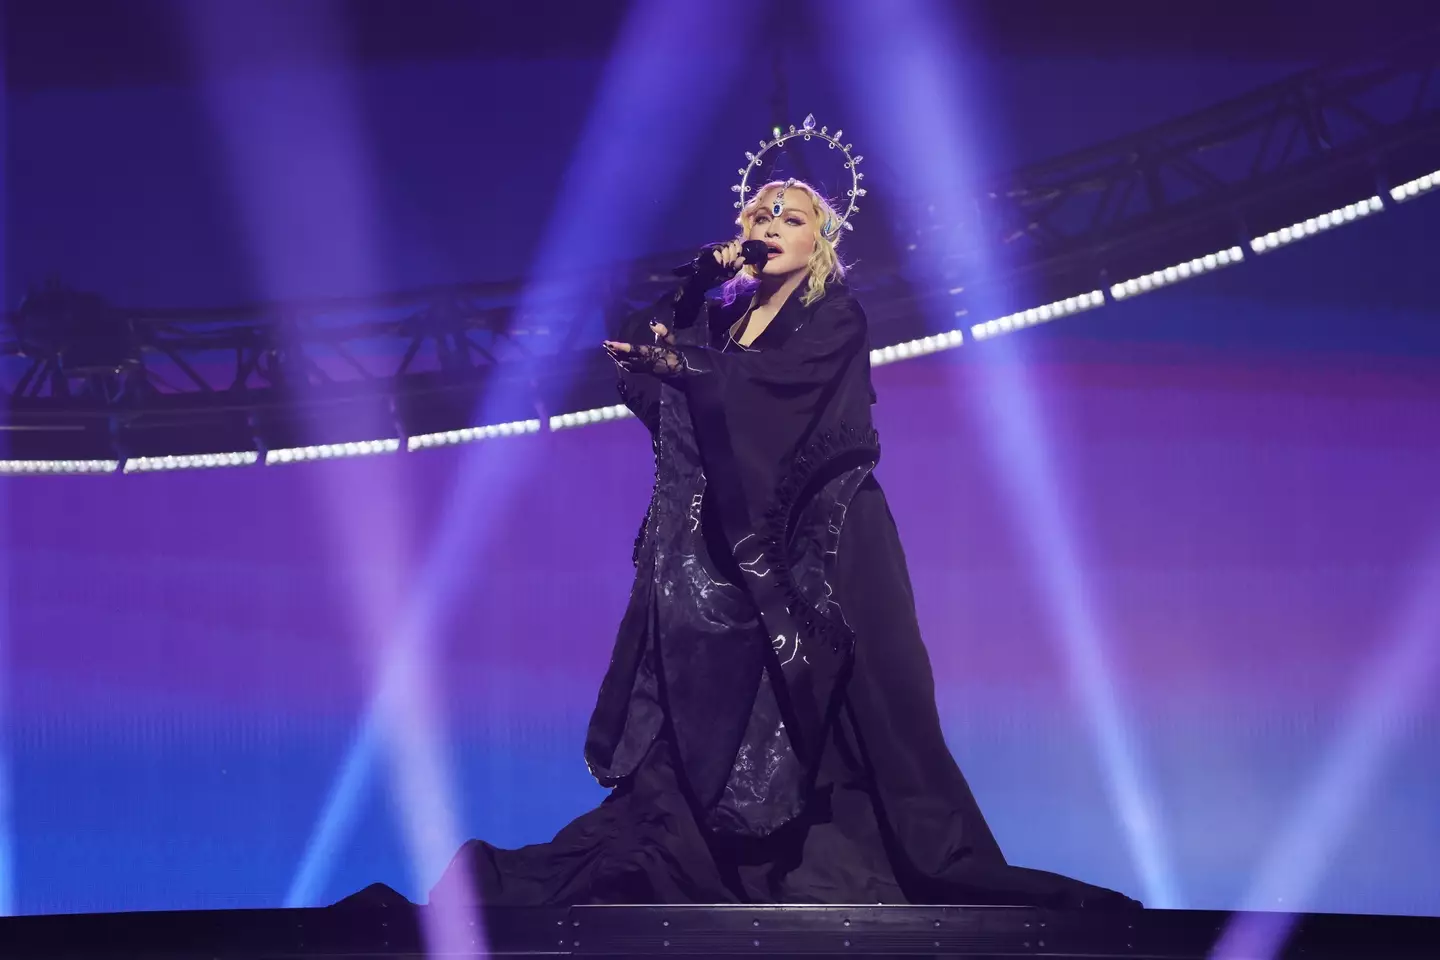 Madonna kicked off her tour last night, October 14.